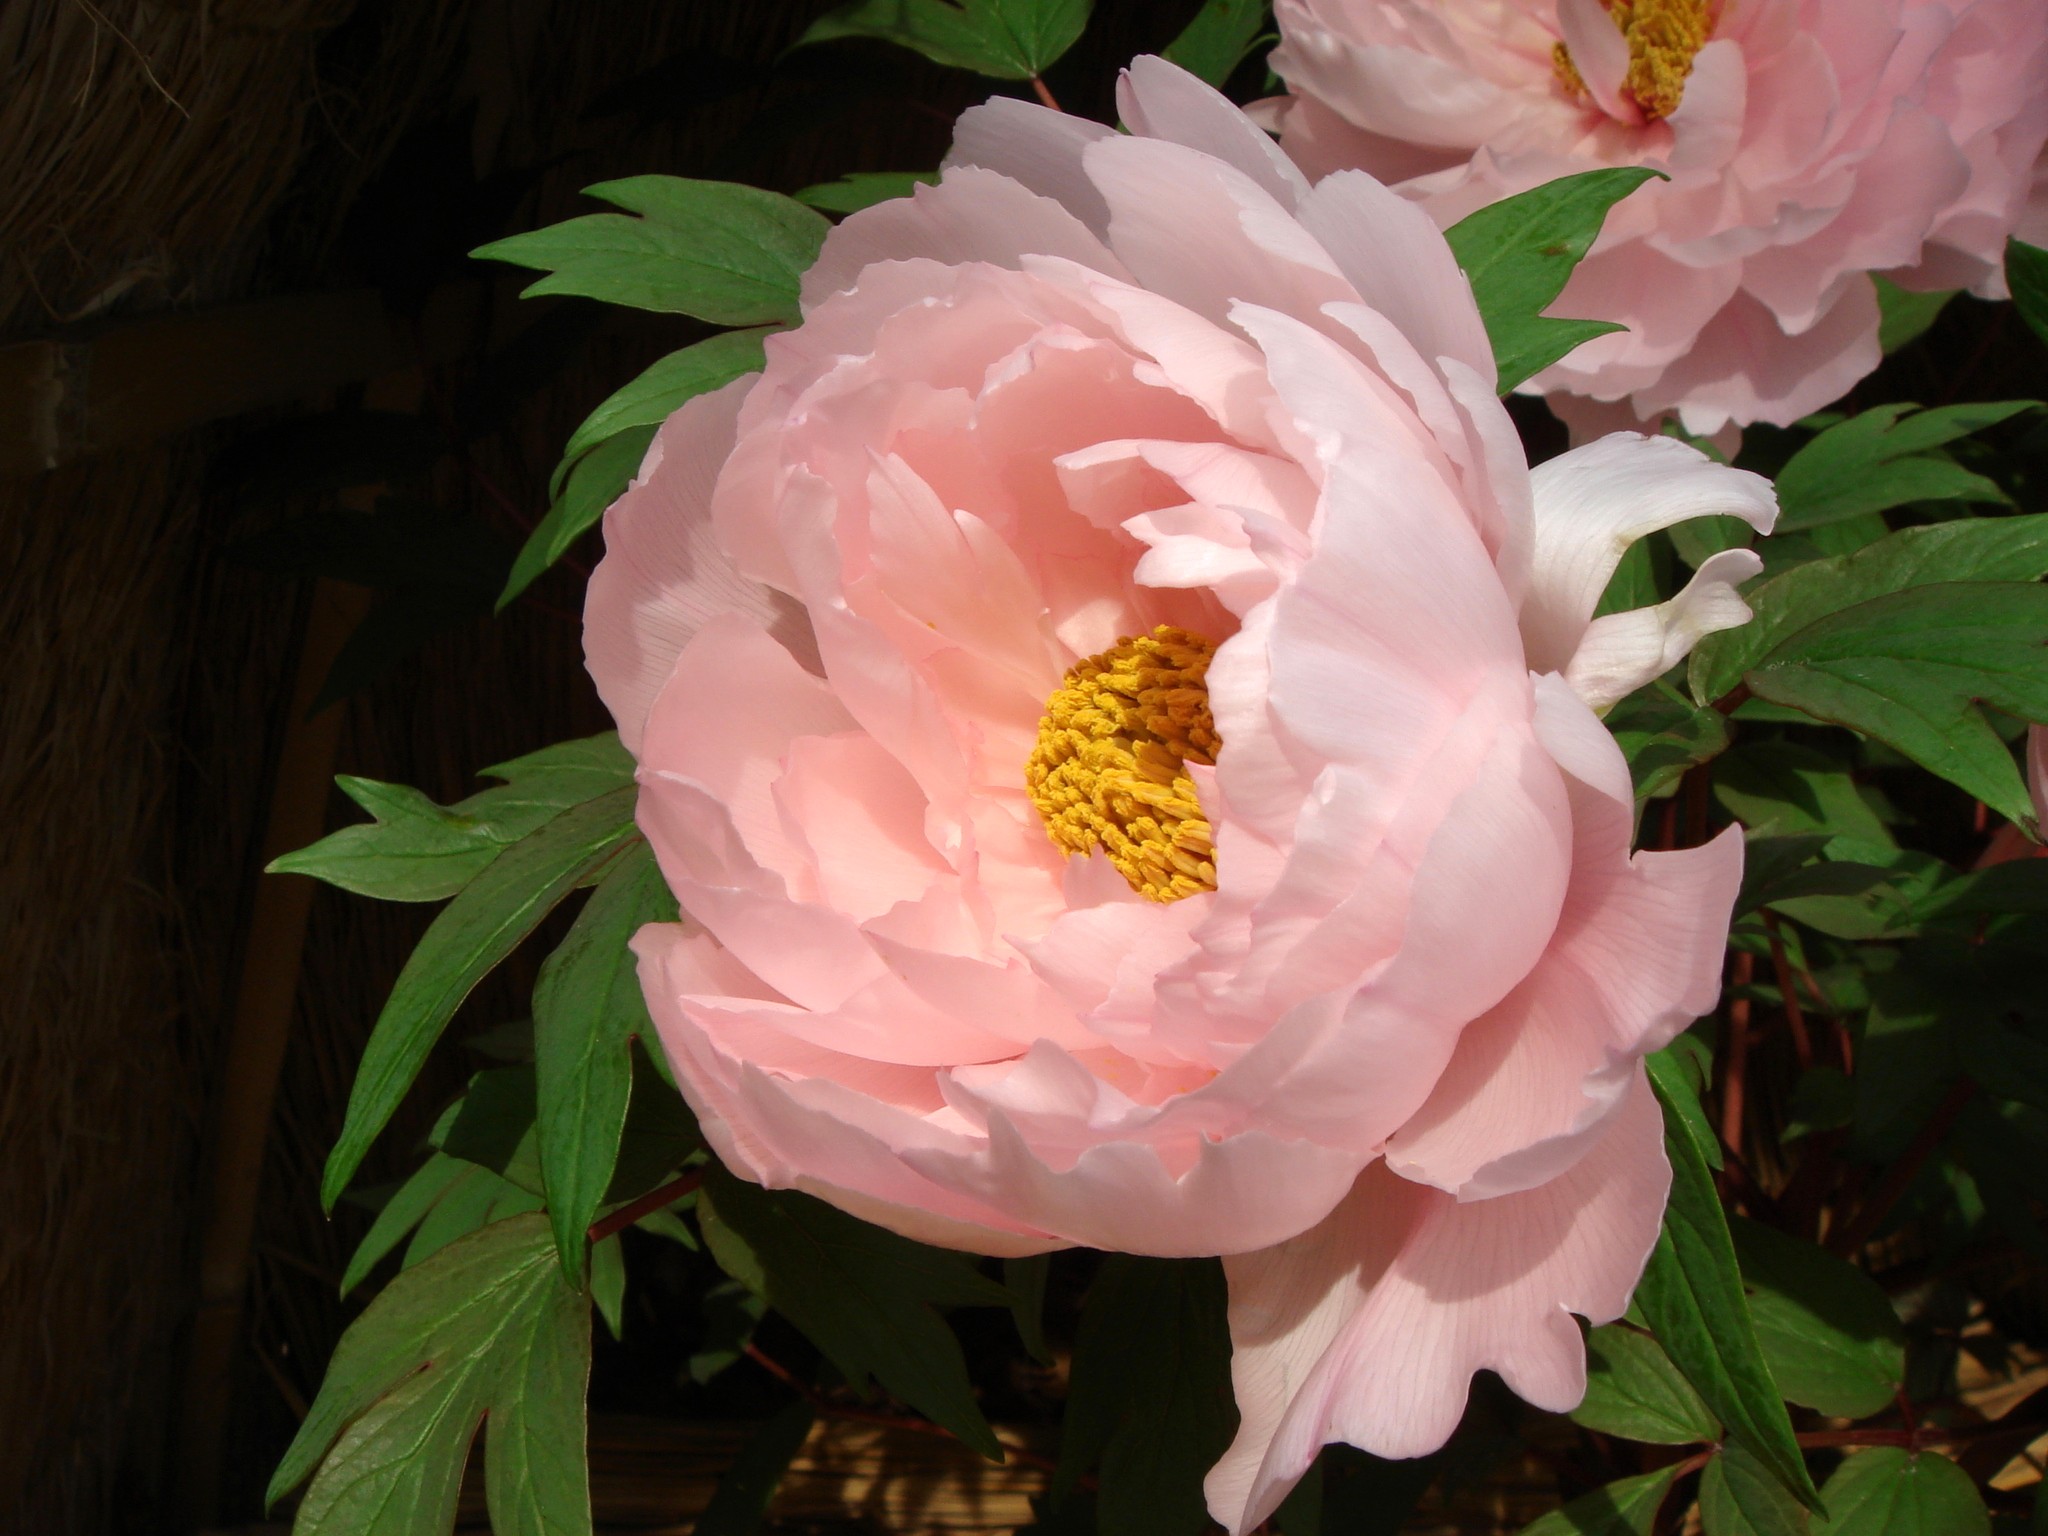 There are peony plants that are indigenous to china, europe and the western...